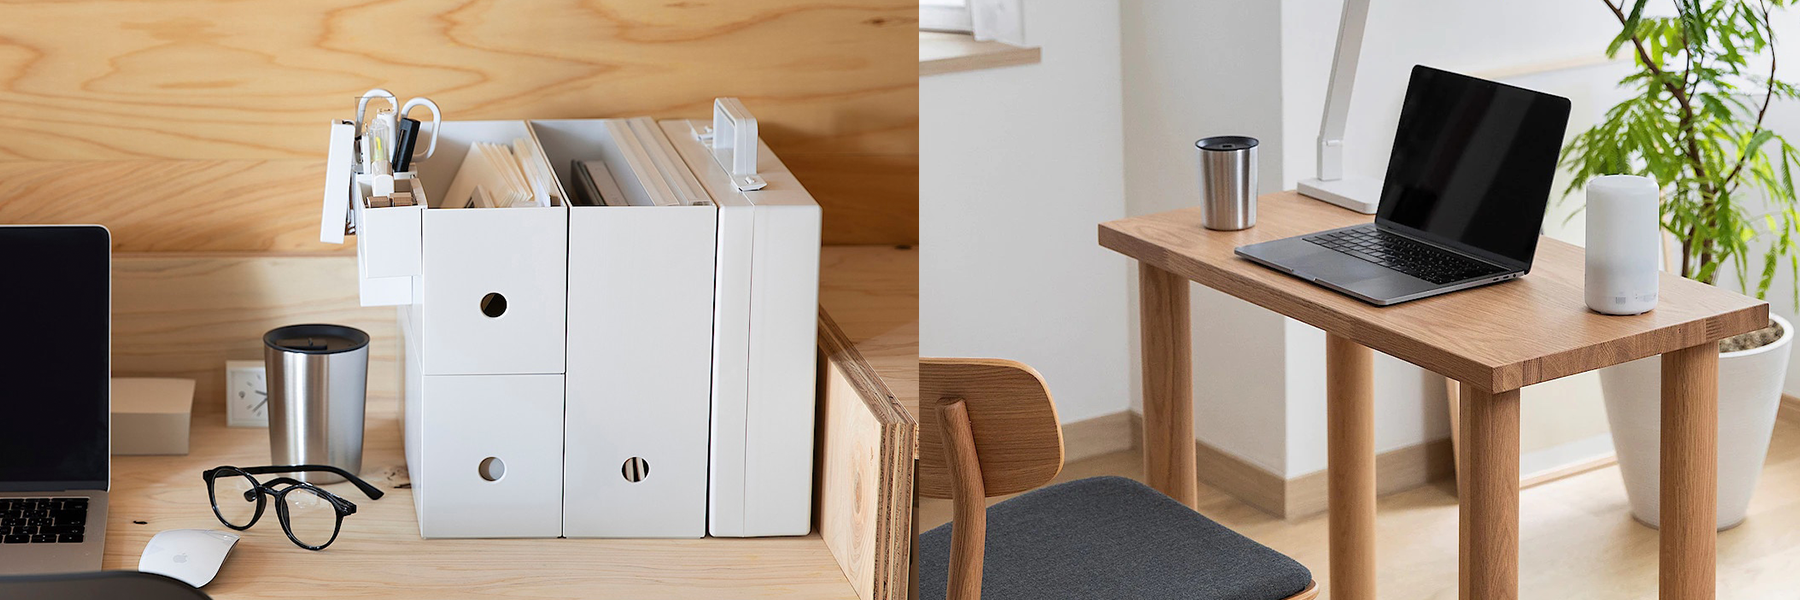 MUJI file boxes, and aroma diffuser for the wfh dad